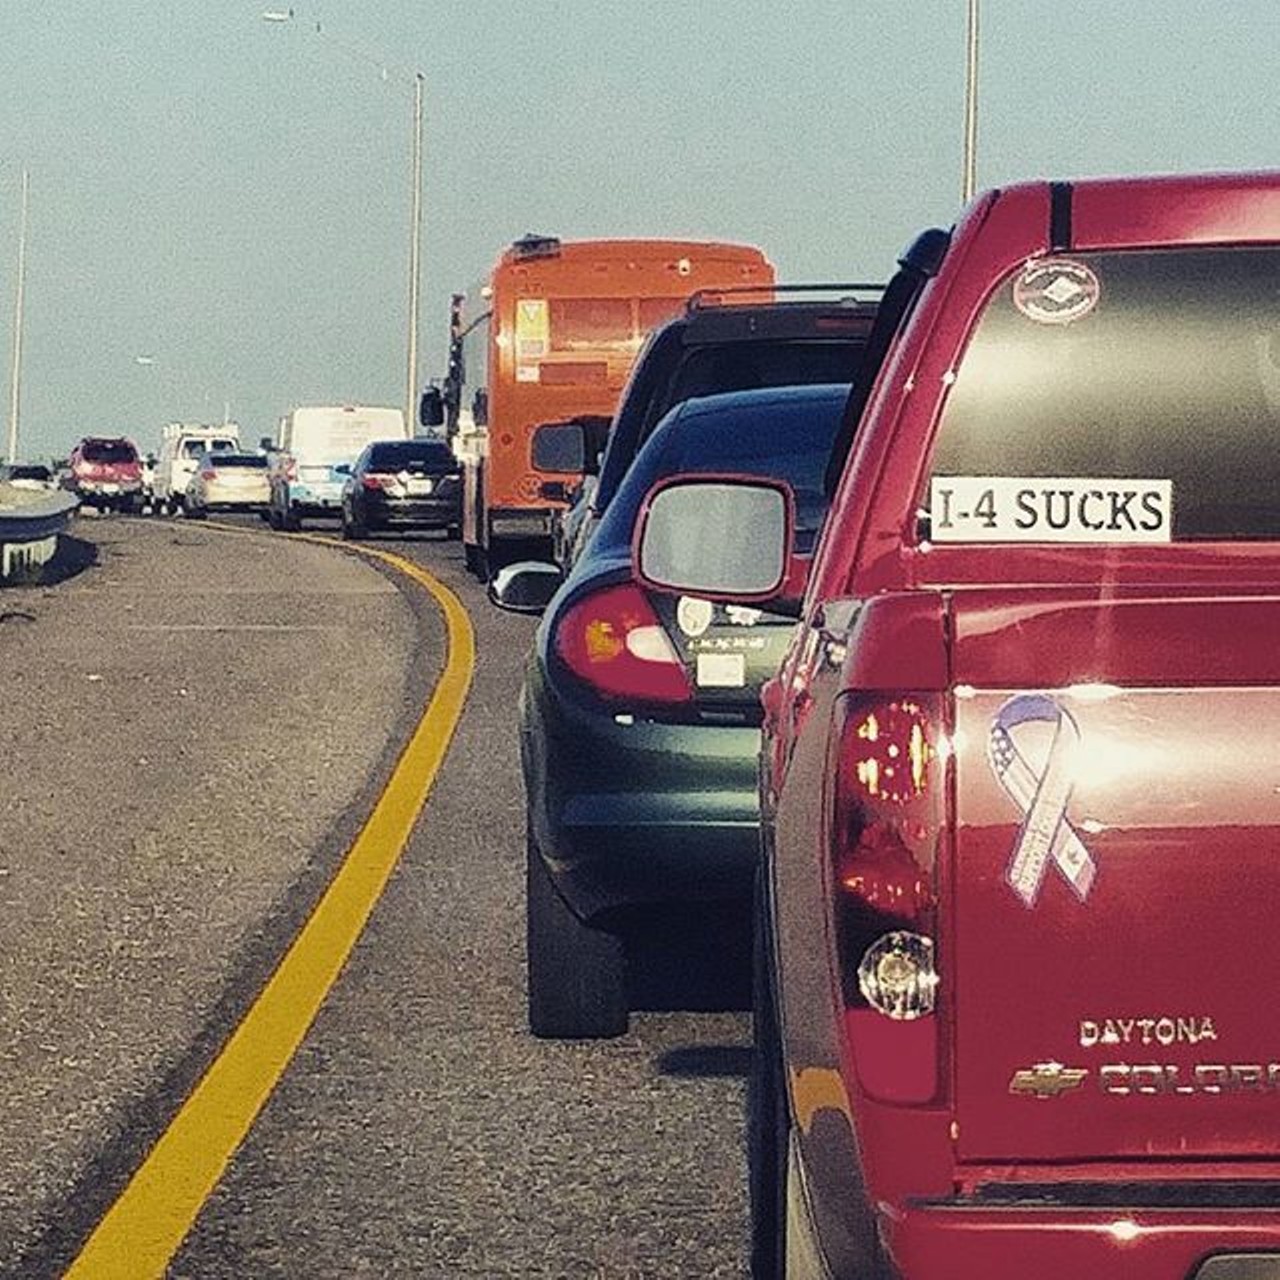 The I-4 Ultimate Project
Interstate 4? More like Parking Lot 4. Sure, eventually, theoretically, this major inconvenience will all be worth it. 
Photo via jeannie_marie_o on Instagram